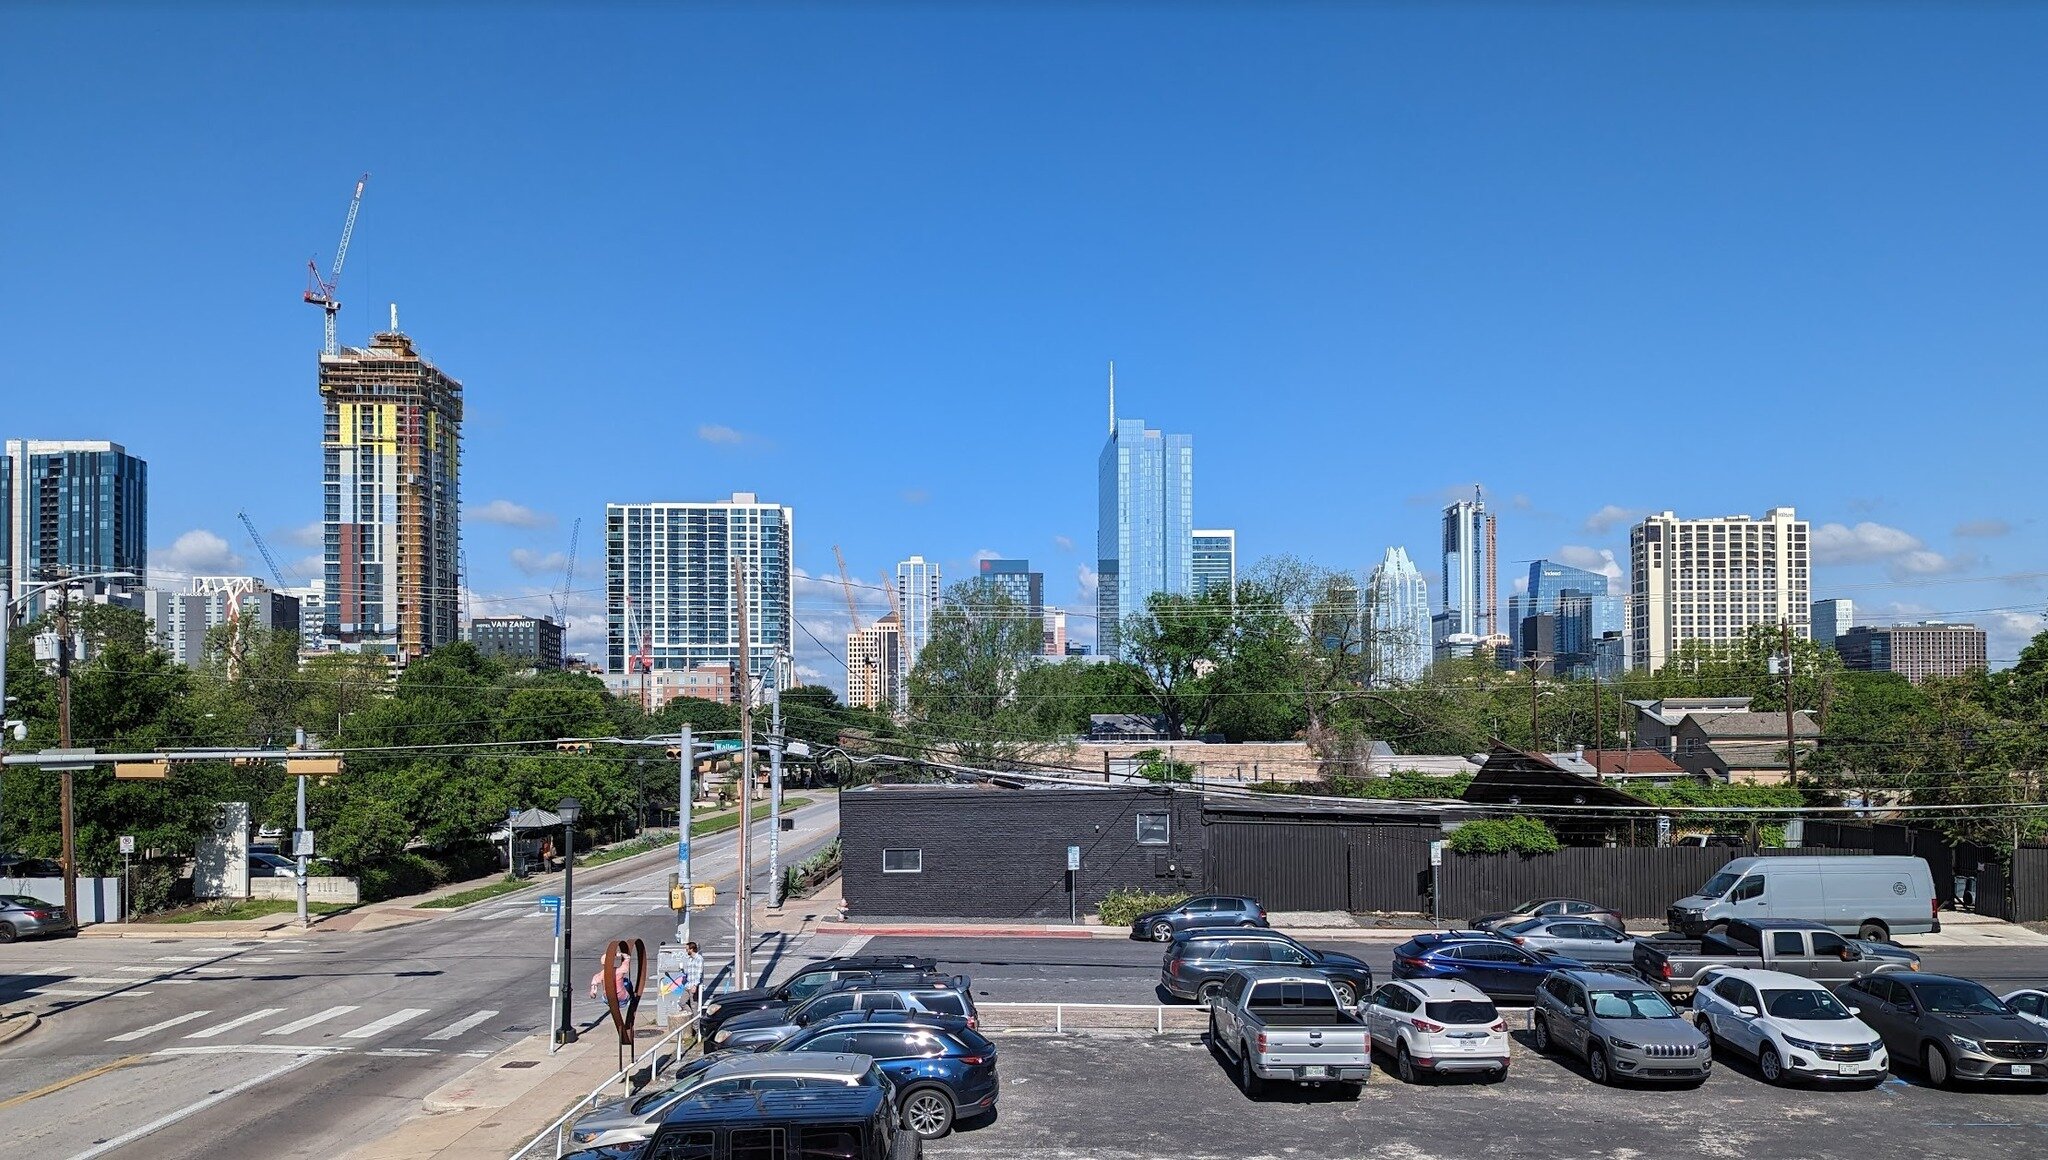 View from the rooftop of our new studio! We've jumped from the west side of downtown to the east, and are thrilled to be in our new purpose-built space at 1204 E Cesar Chavez St.  Will share photos soon - or maybe we we should just throw a party...
#